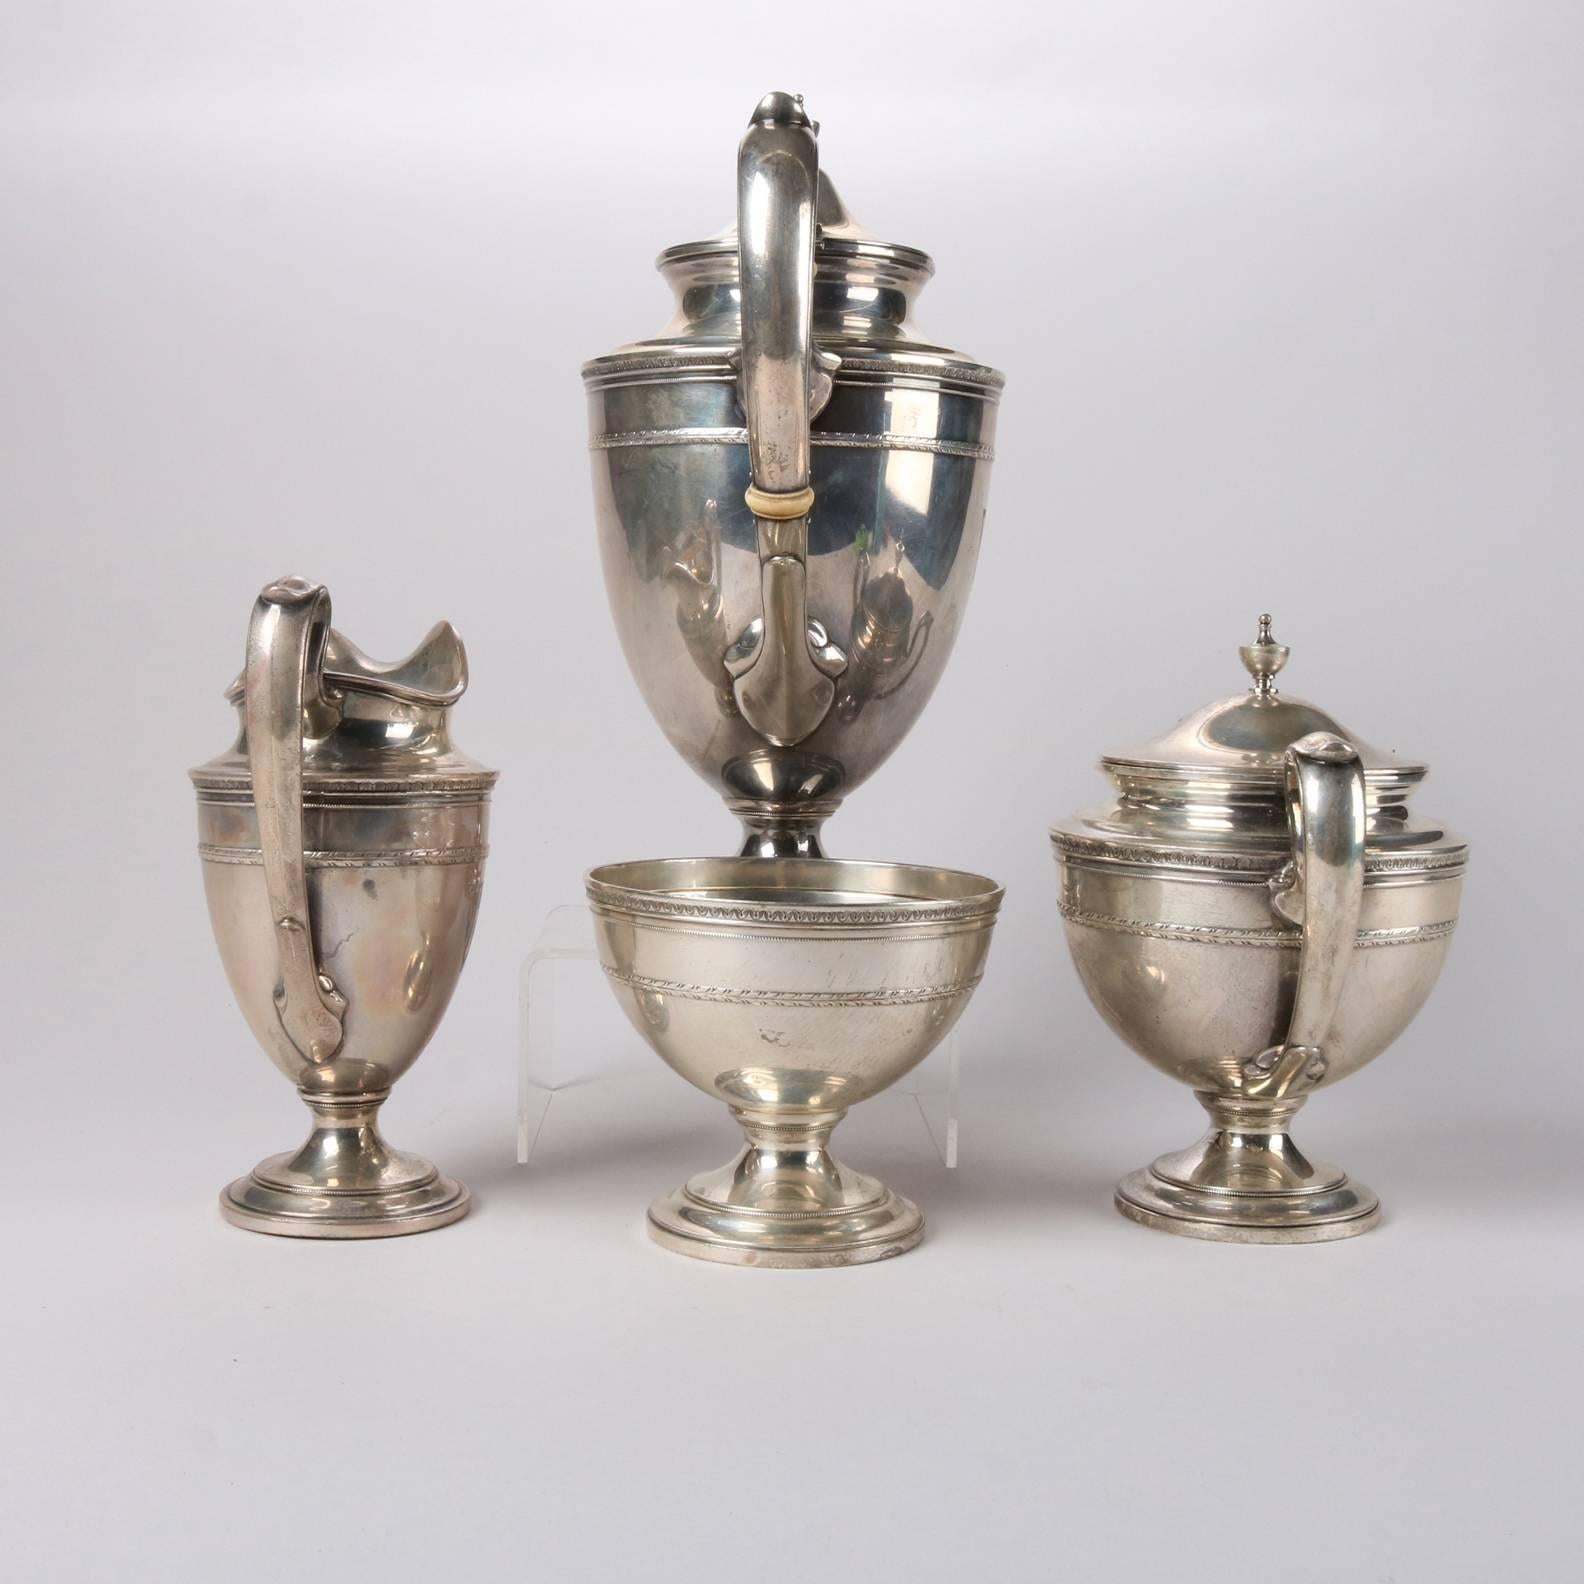 Antique English Gorham Edgeworth sterling silver four-piece tea set features footed tea pot, covered sugar, creamer, and waste bowl, hallmarked on bases, 